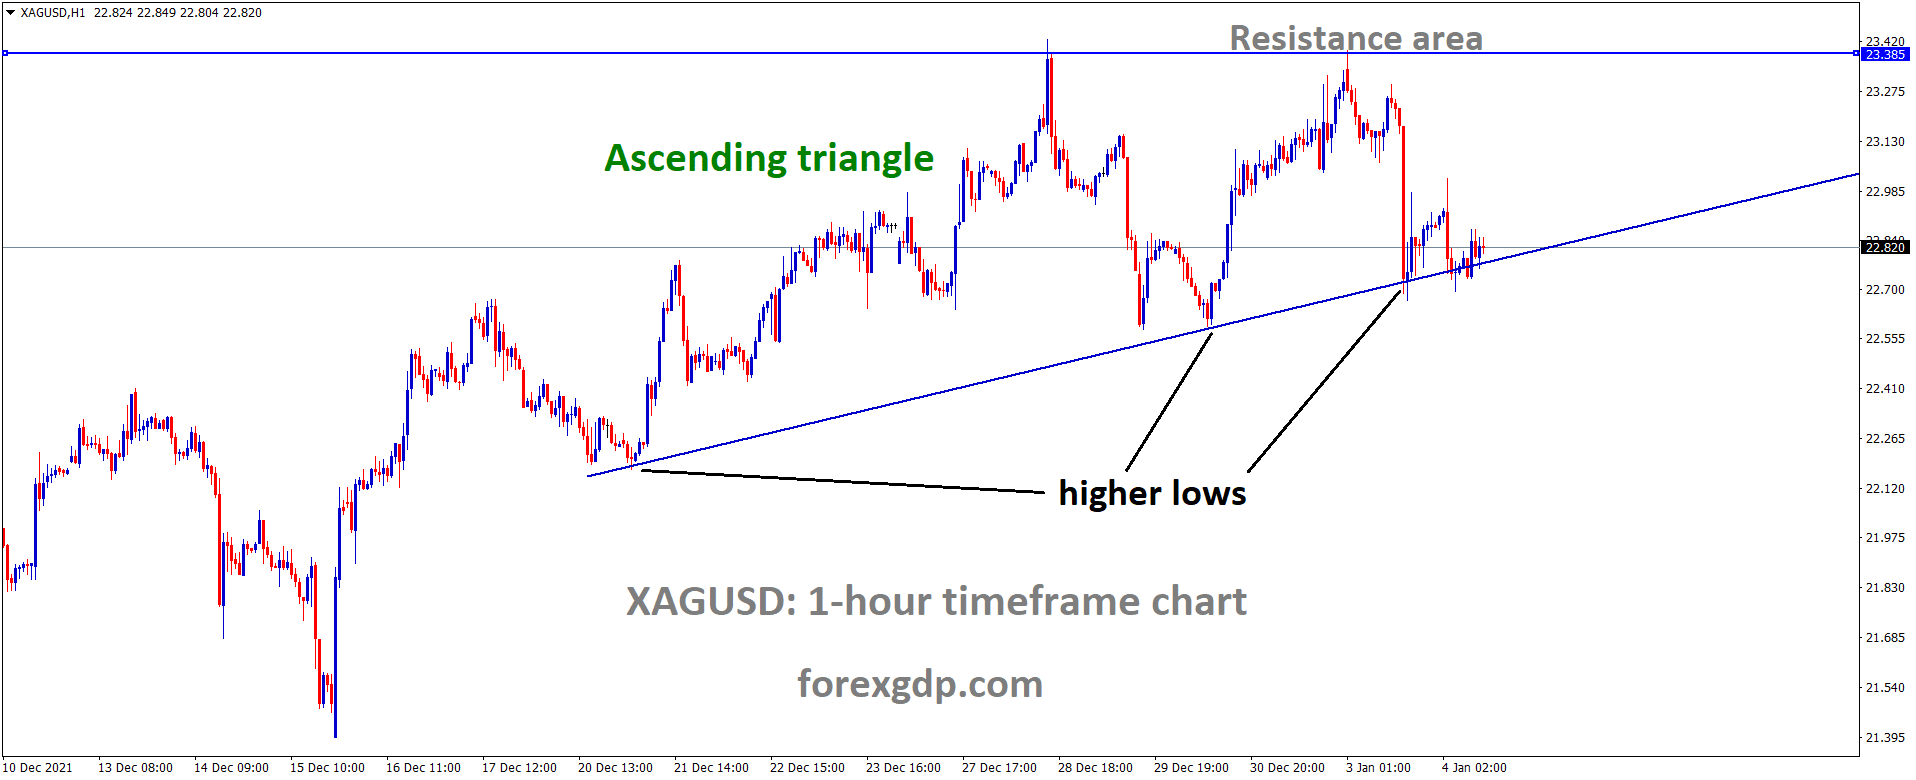 XAGUSD Silver price is moving in an ascending triangle pattern and the market has reached the support area of the triangle pattern